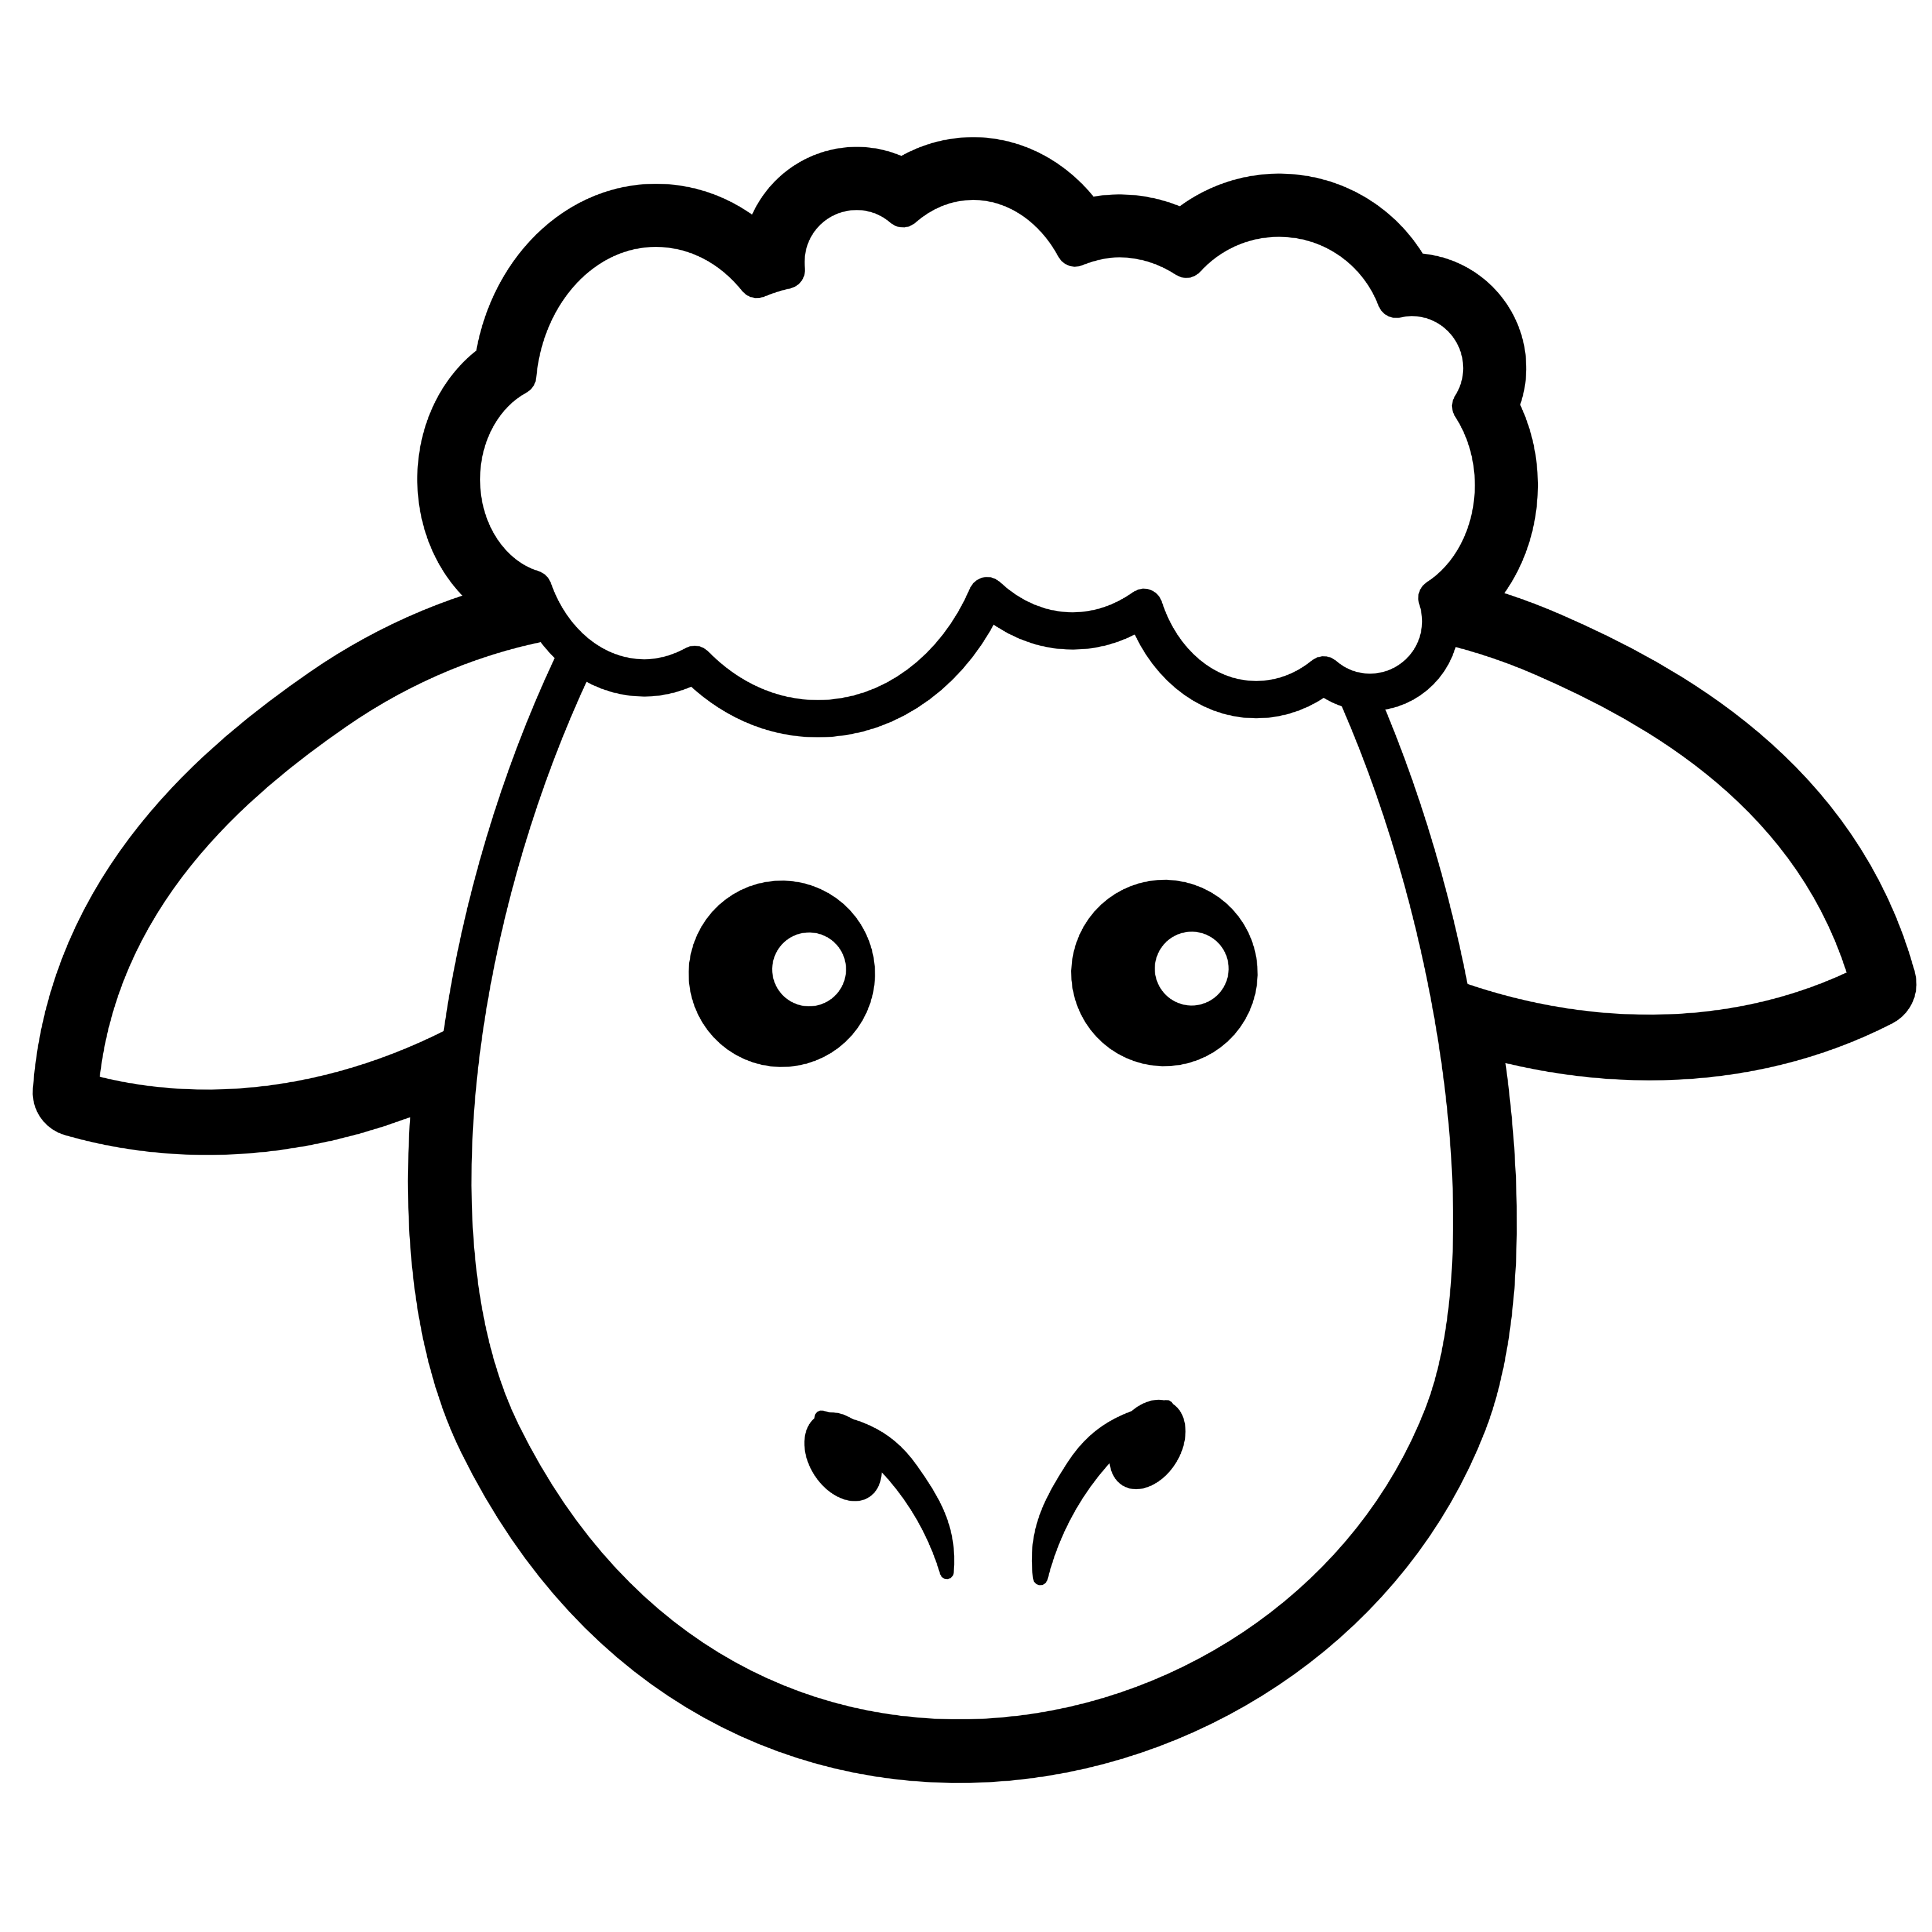 Angry Black Sheep Clipart | Clipart Panda - Free Clipart Images